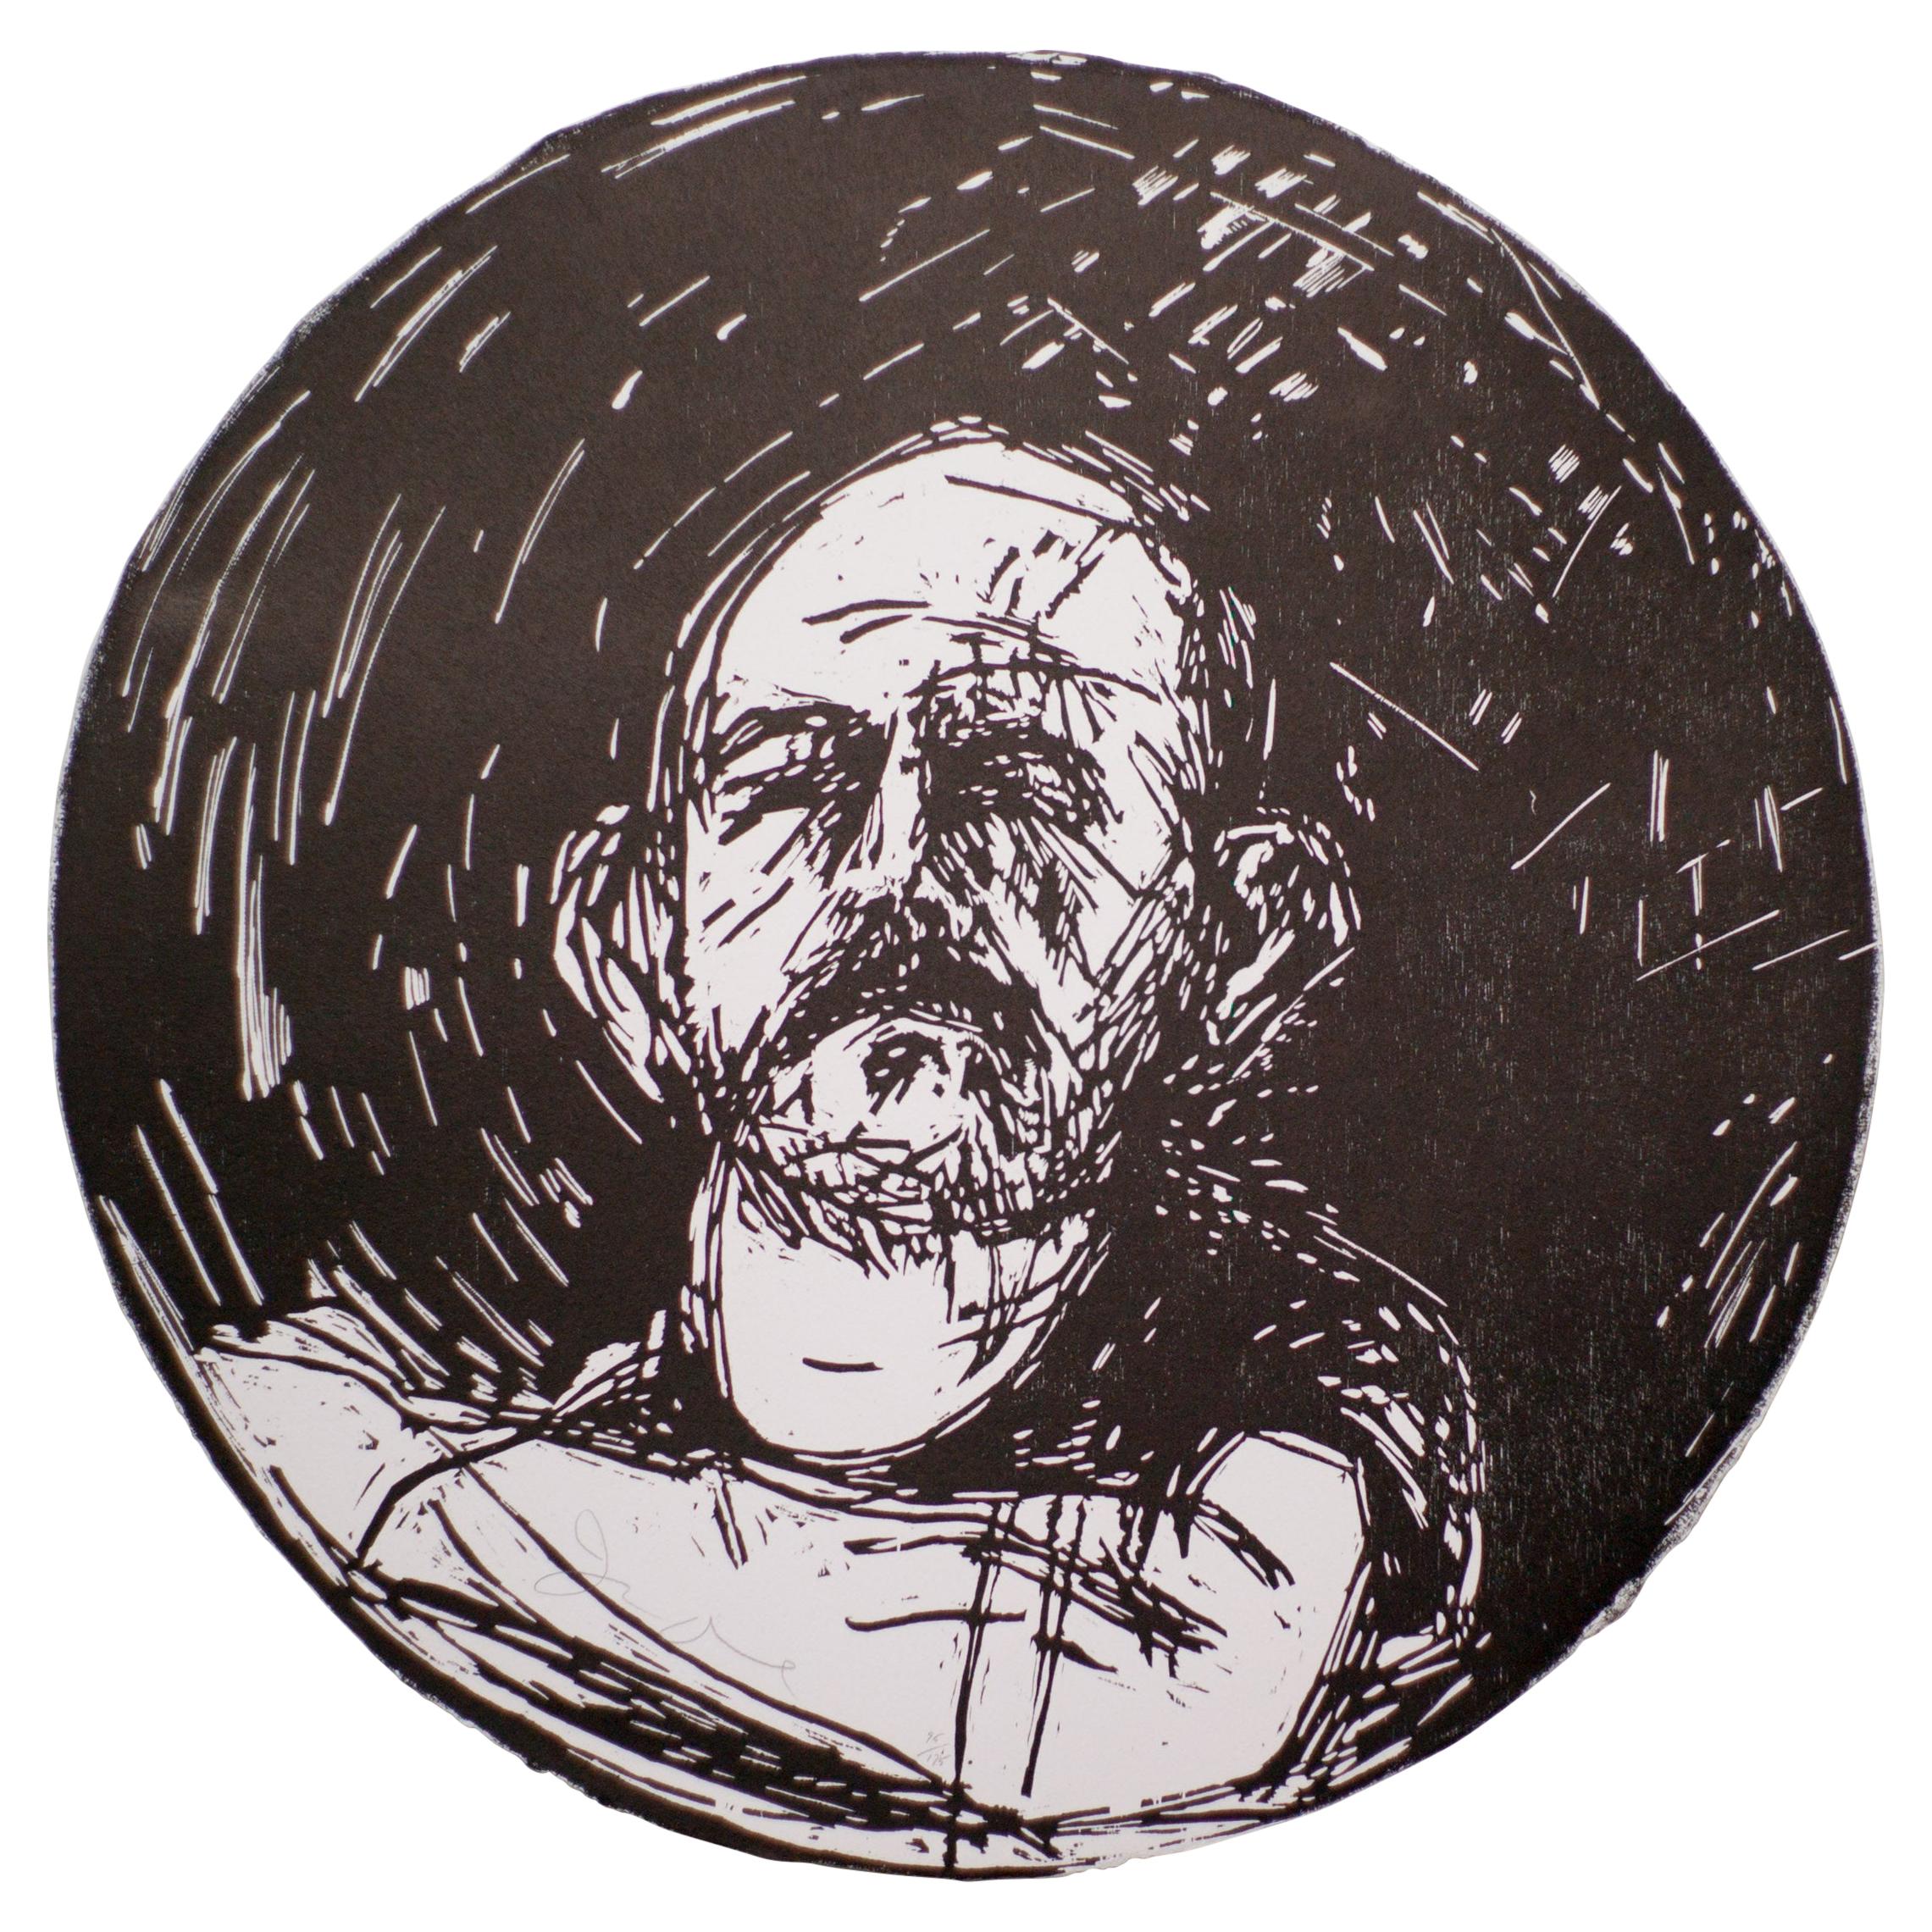 Jim Dine, Untitled, from "Self-Portrait in a Convex Mirror"